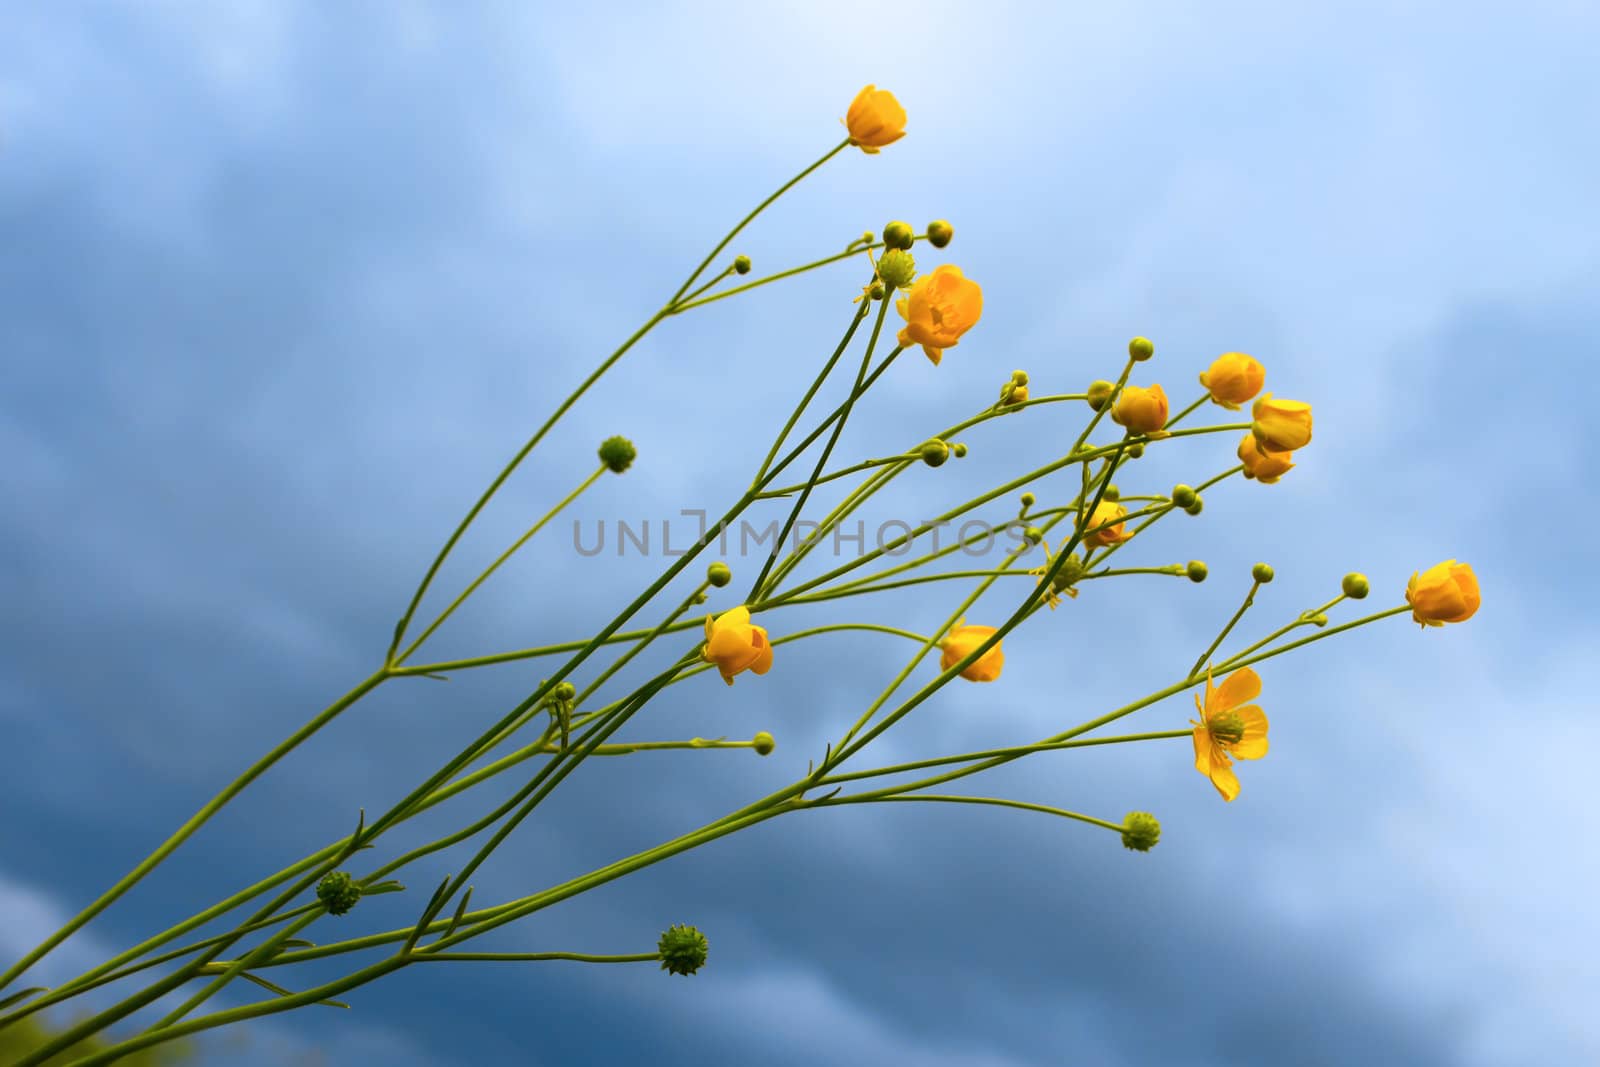 Plants with yellow flowers on a background of overcast gray sky